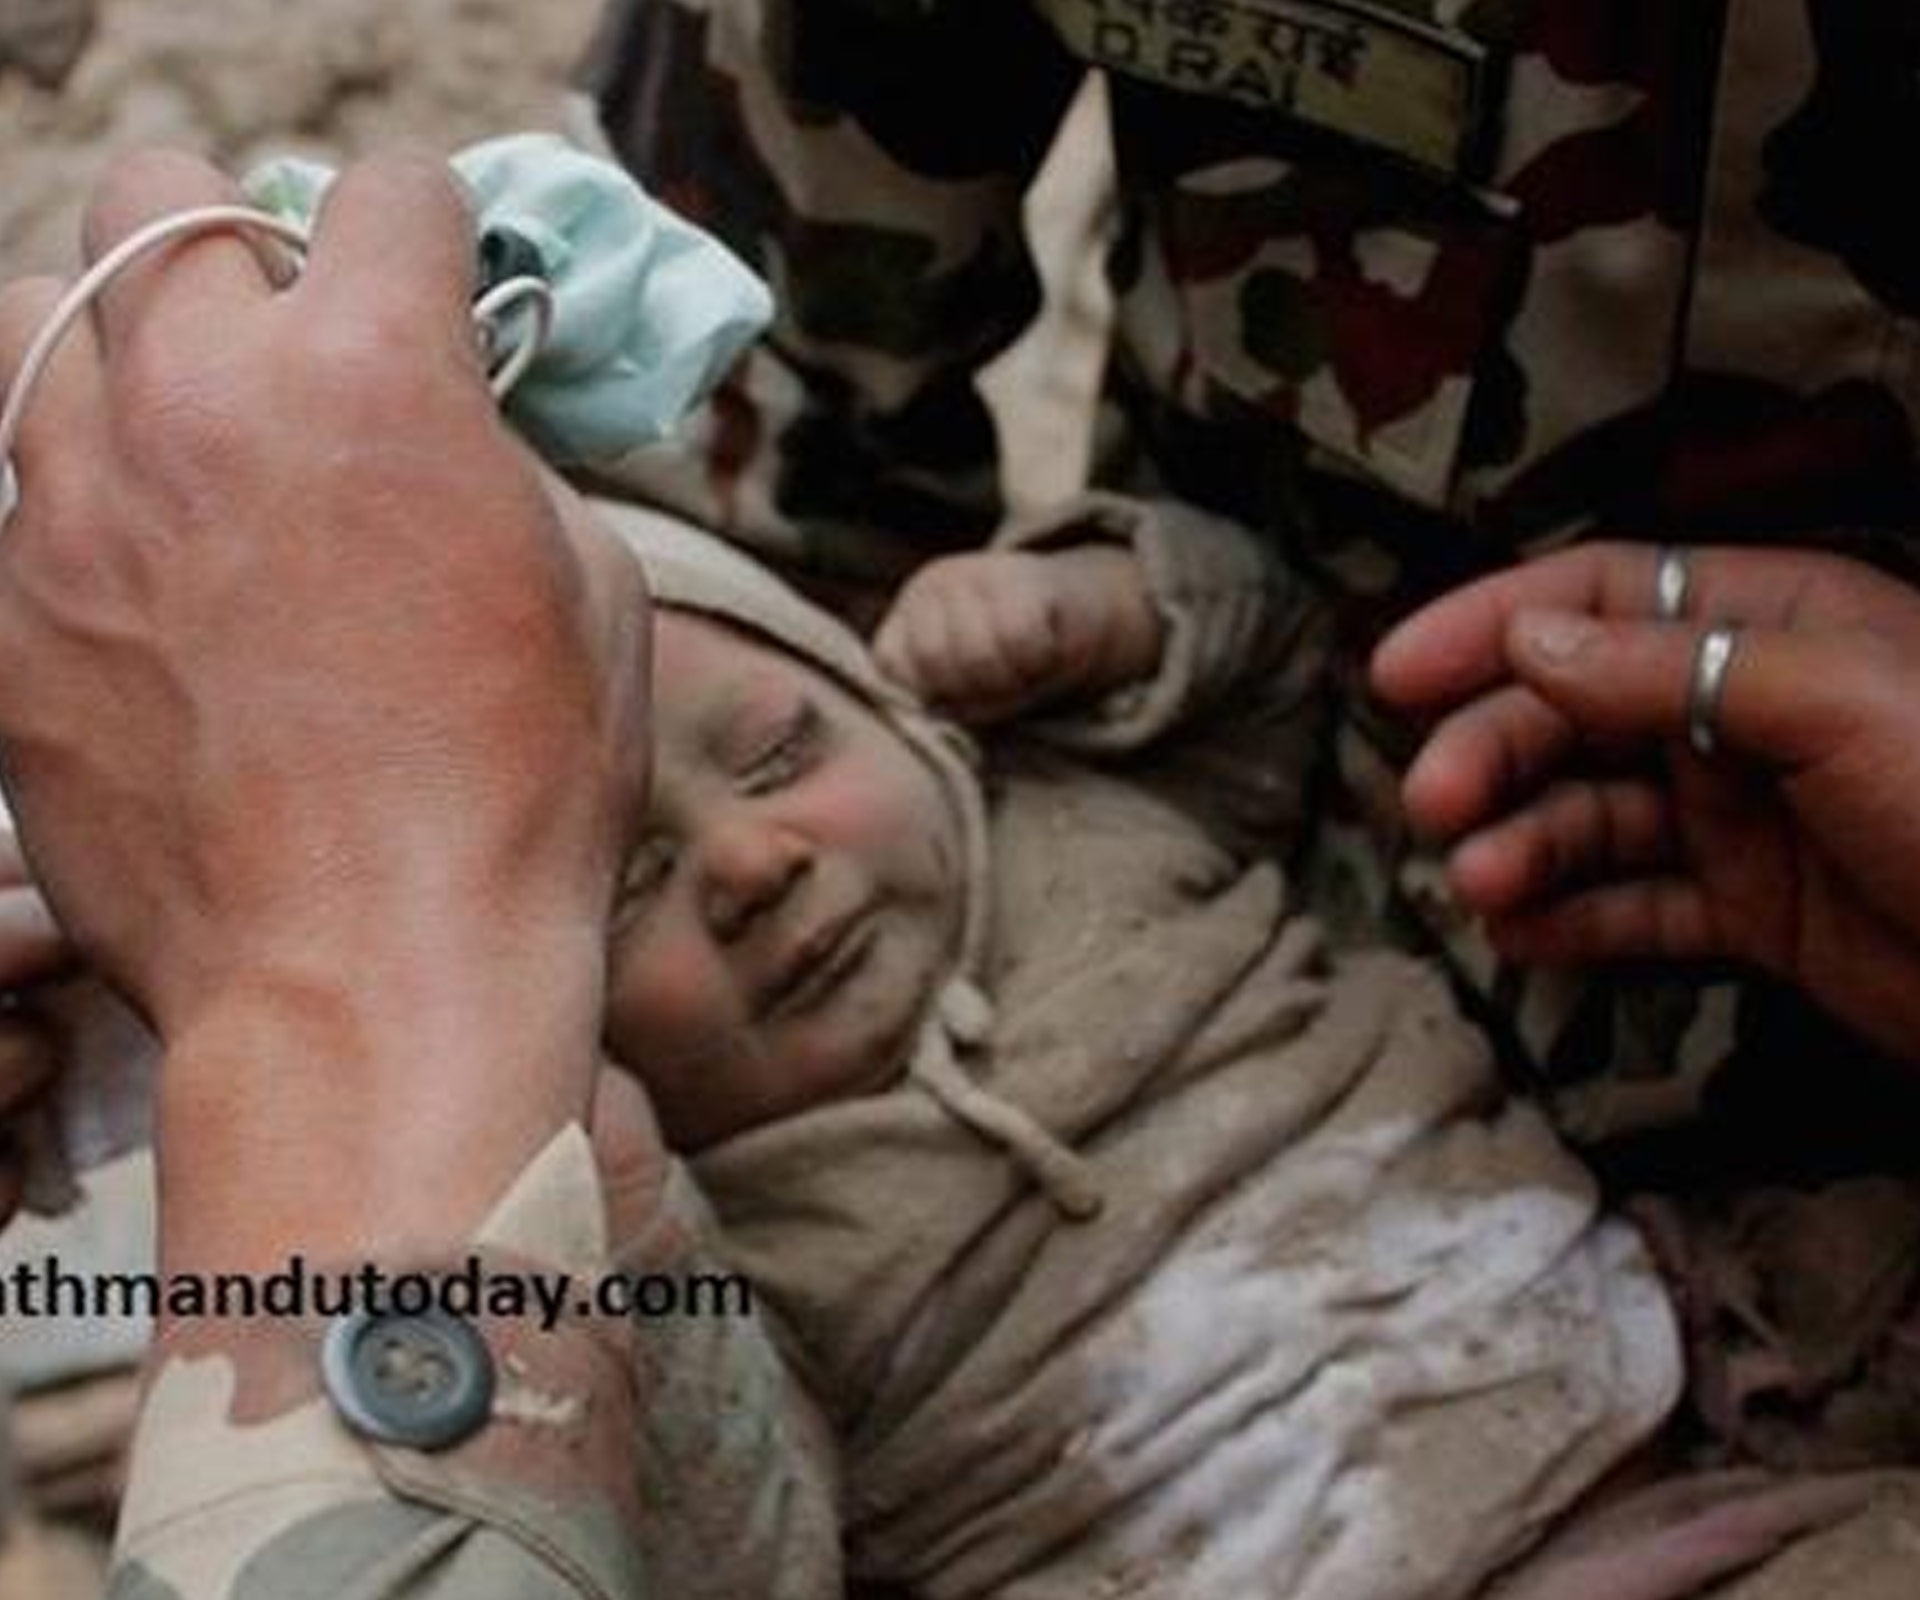 Miracle baby pulled from the rubble in Nepal